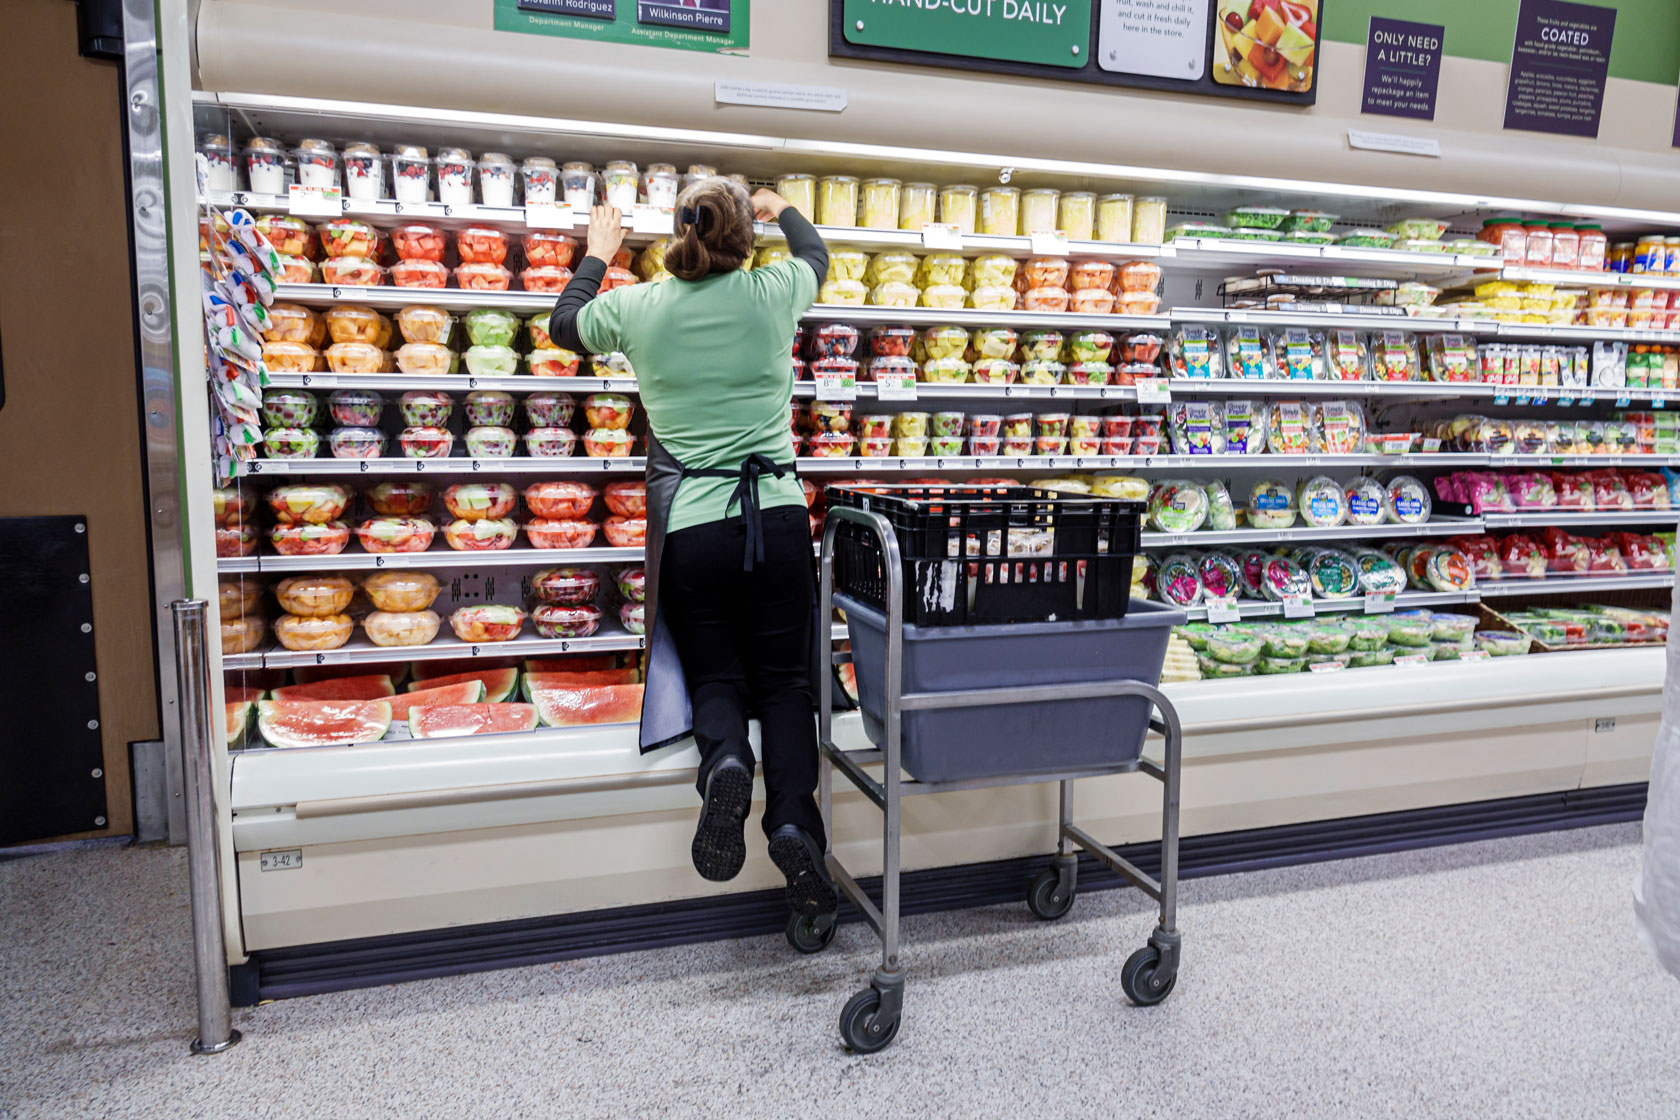 Image showing a female grocery store employee putting pre-cut fruit onto a shelf.